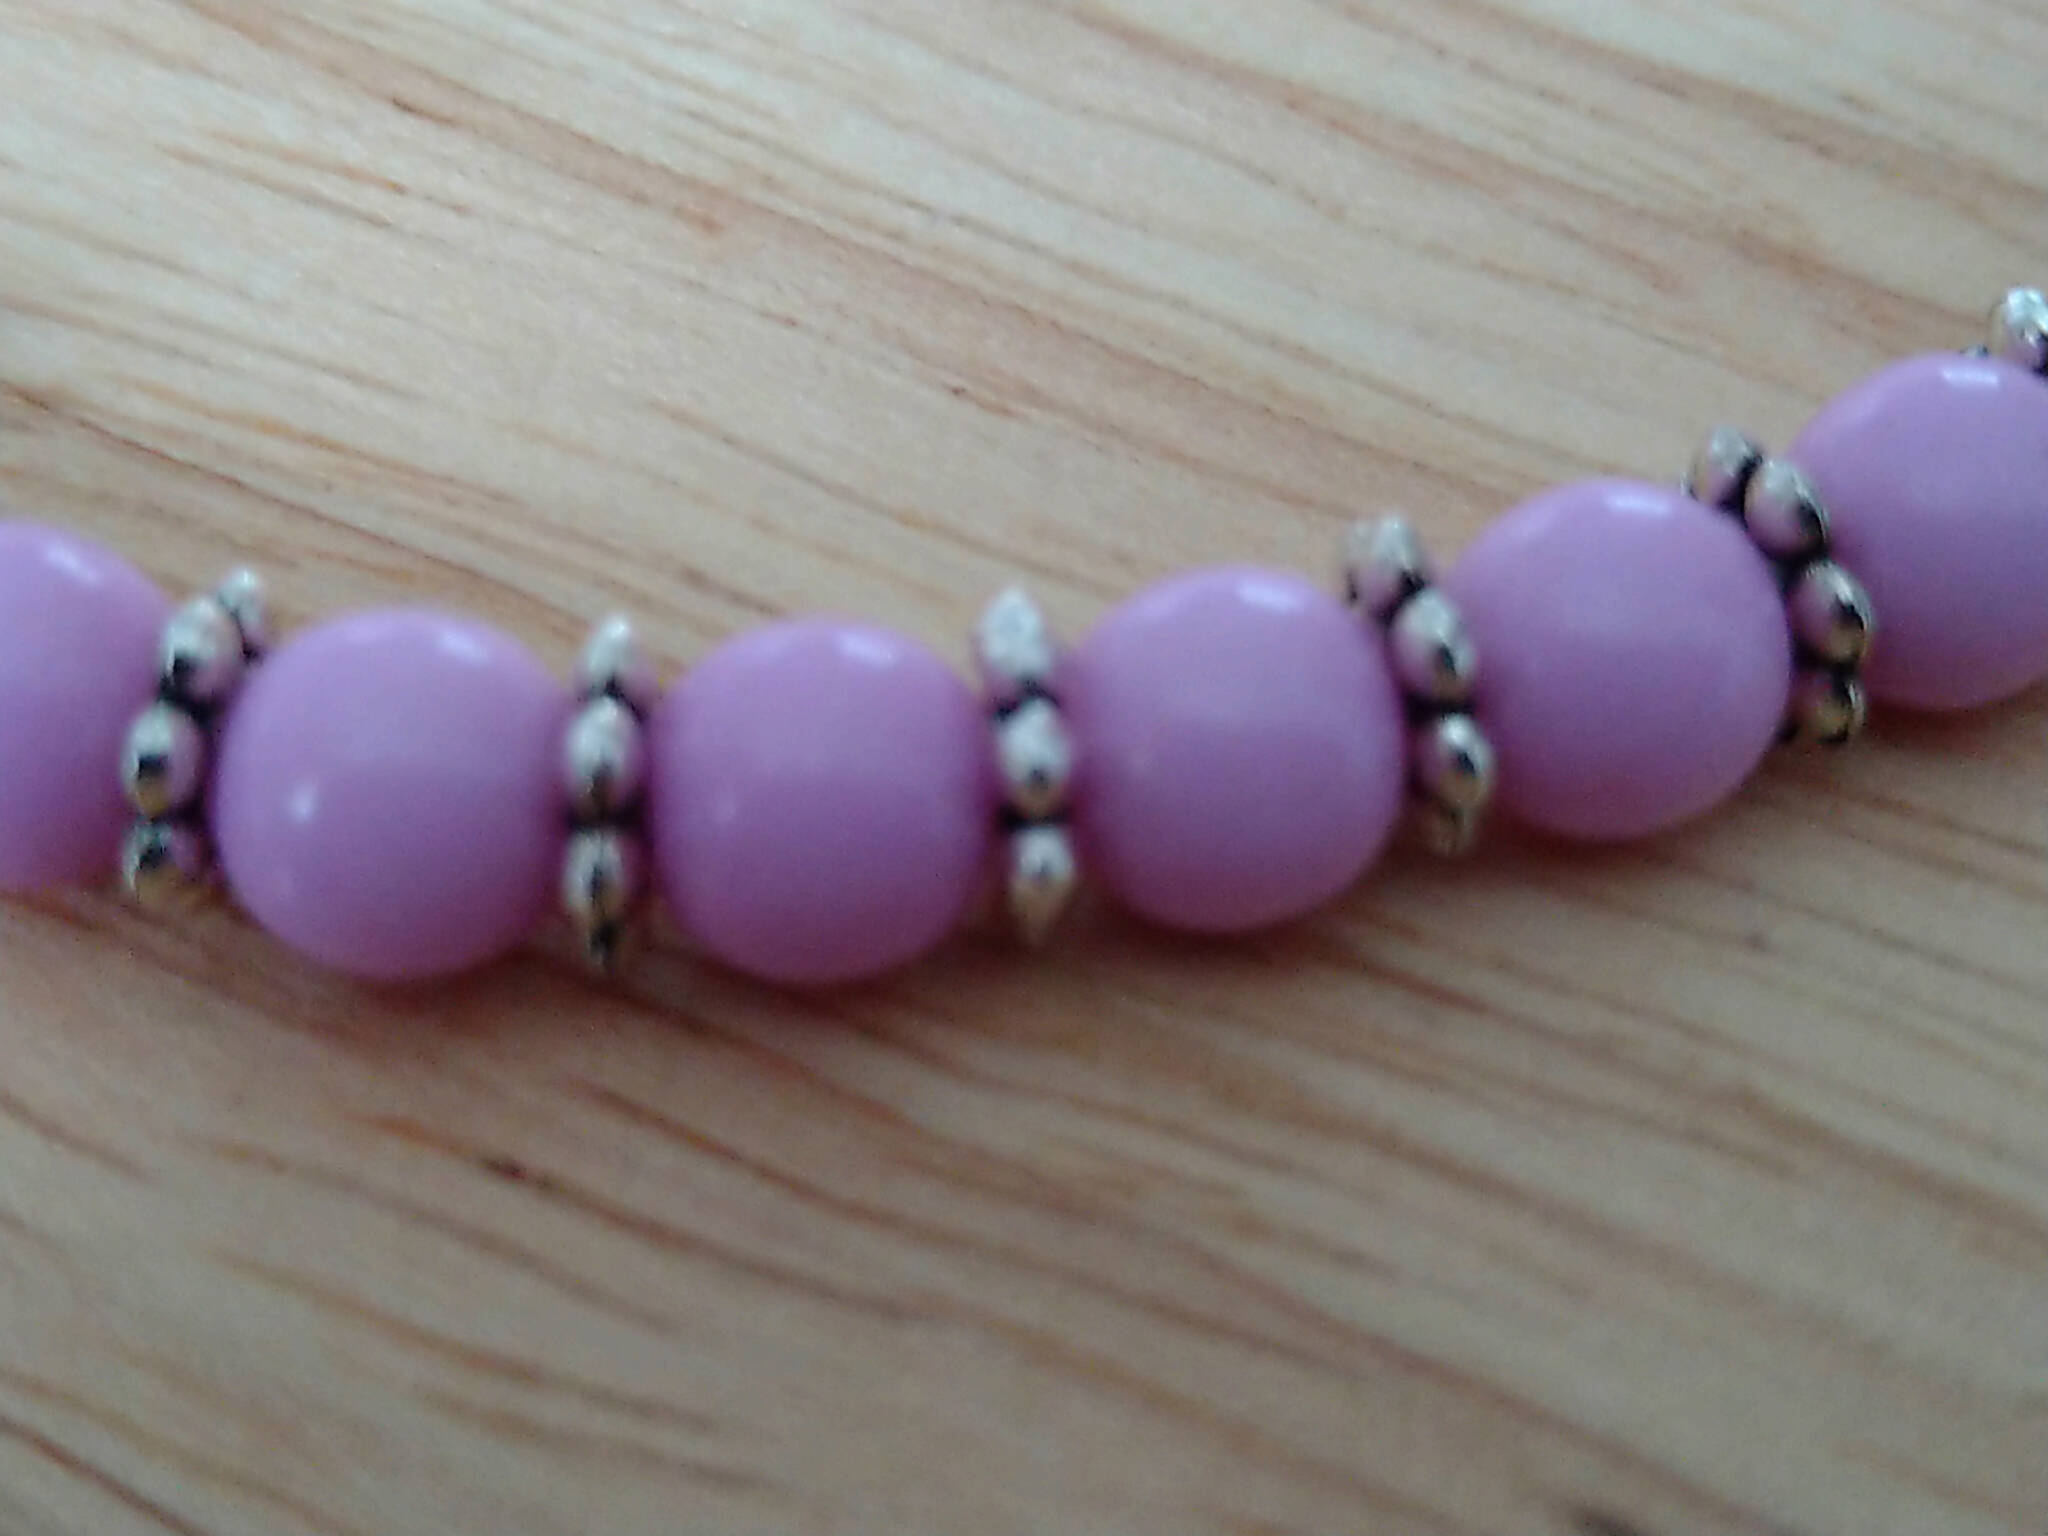 Pink coloured bracelet, handmade using recycled beads & silver coloured daisy spacers. 21cm length